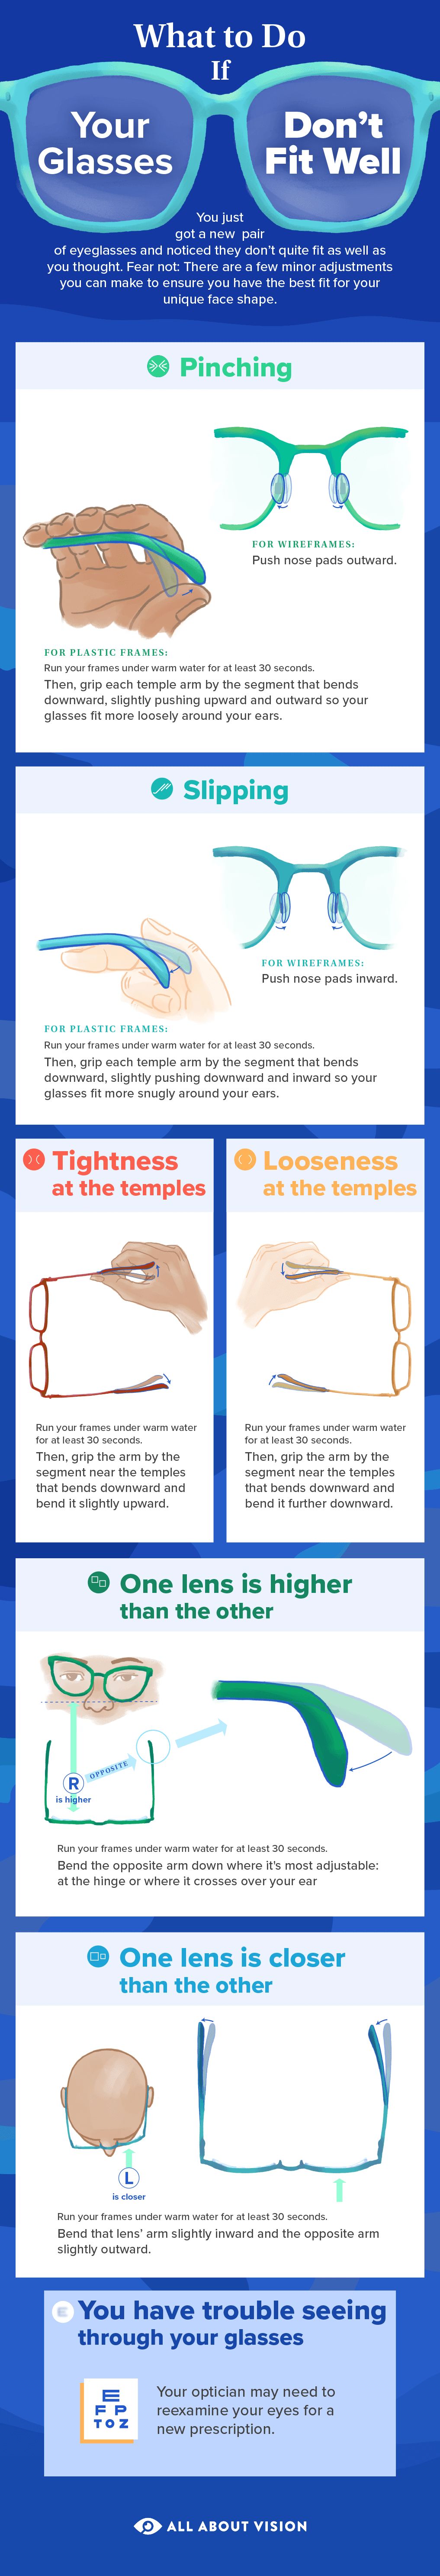 https://cdn.allaboutvision.com/Infographic_what-to-do-if-glasses-dont-fit-well-compressor.png